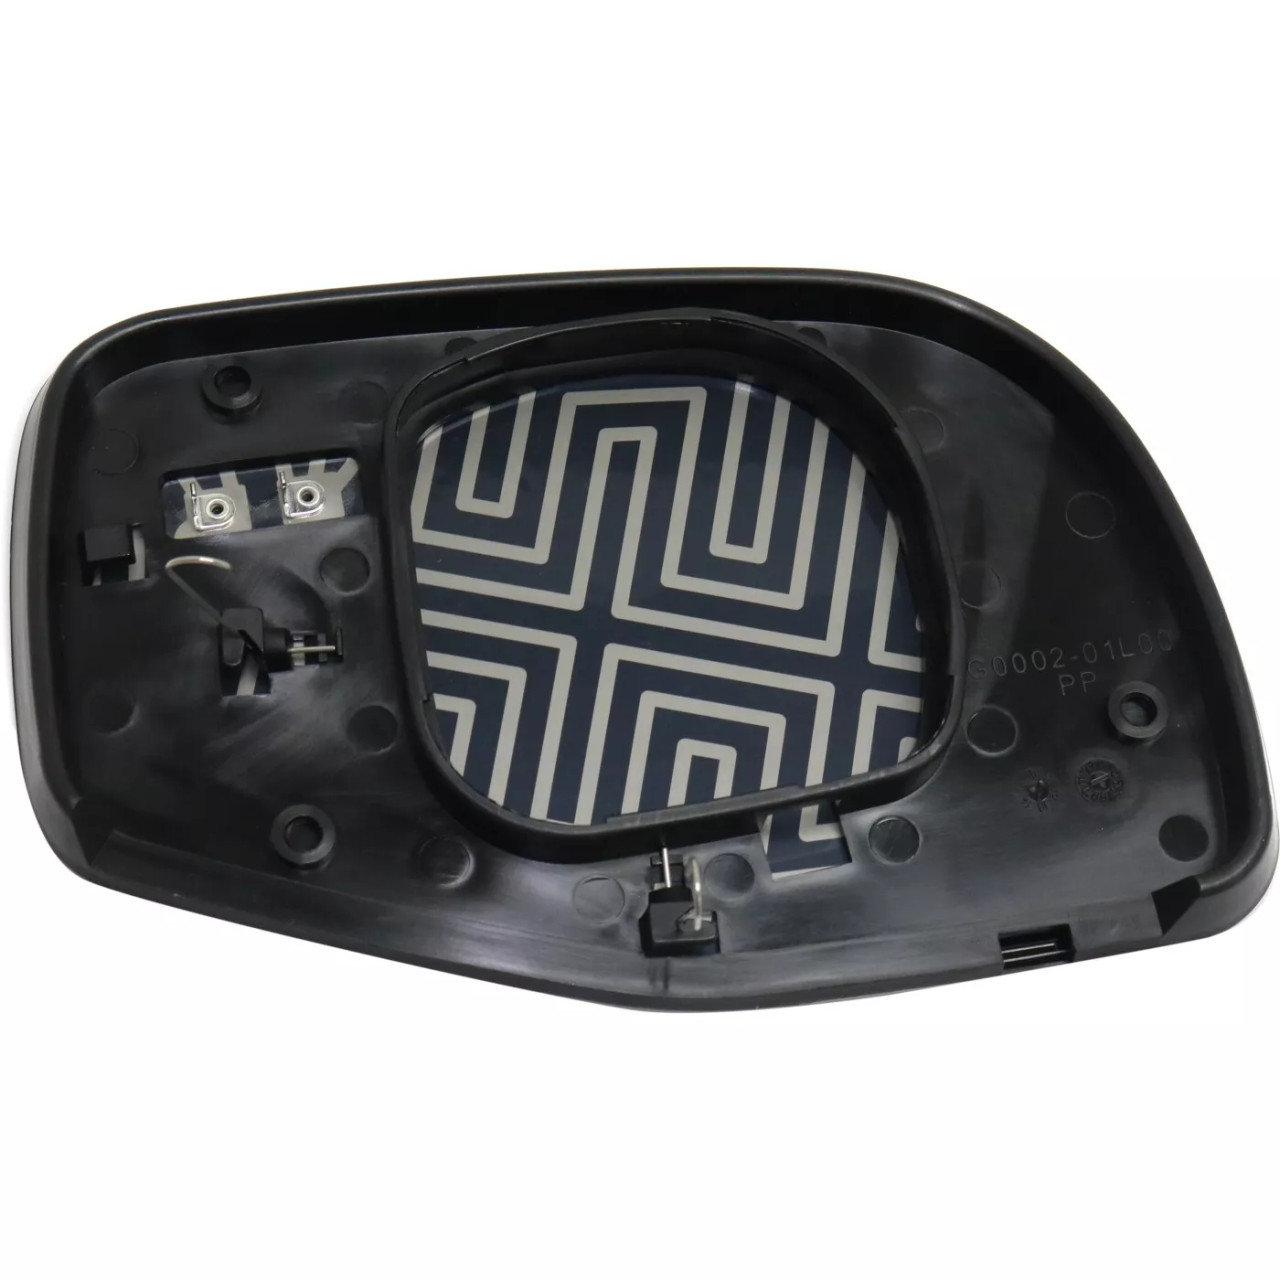 Mirror Glasses Driver Left Side Heated Hand for Ford Explorer Mountaineer 02-05